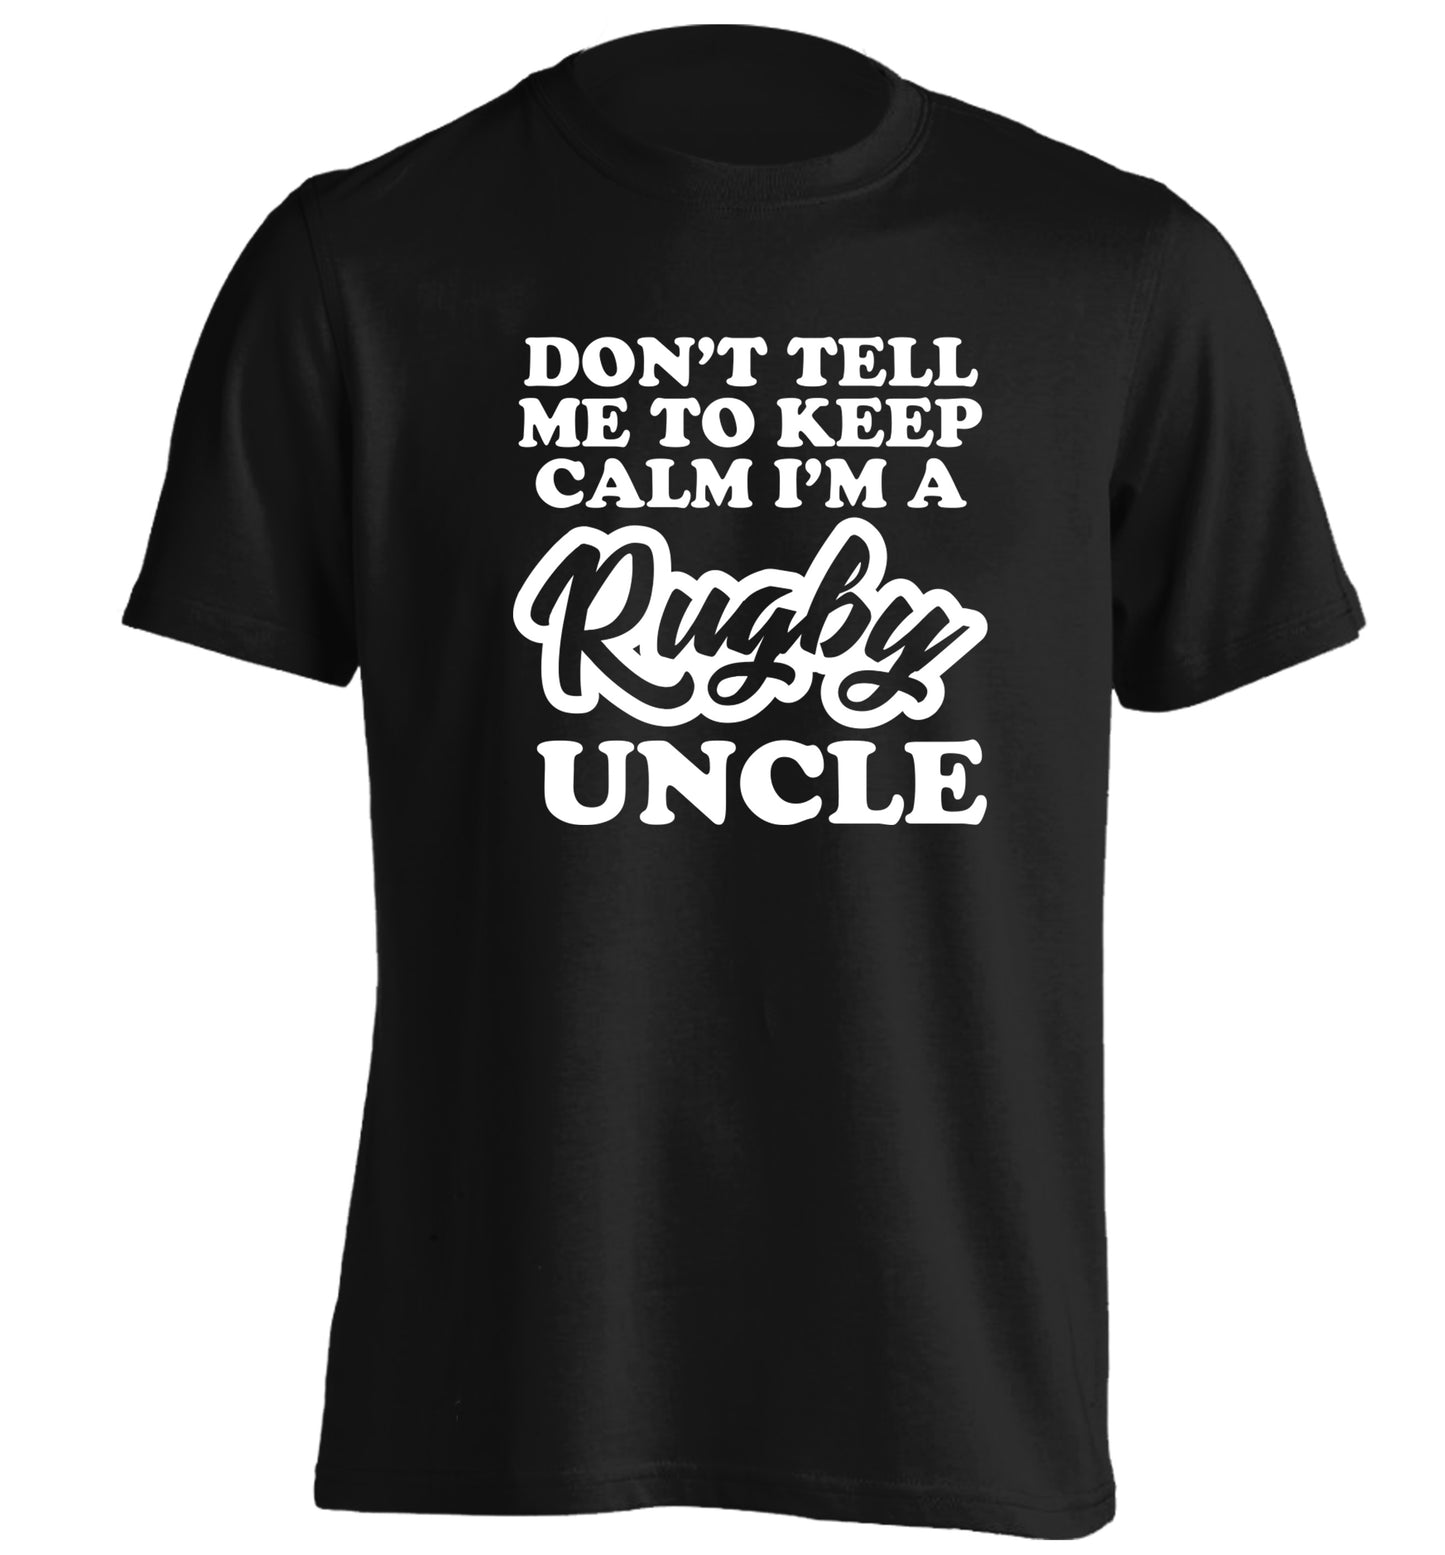 Don't tell me to keep calm I'm a rugby uncle adults unisex black Tshirt 2XL